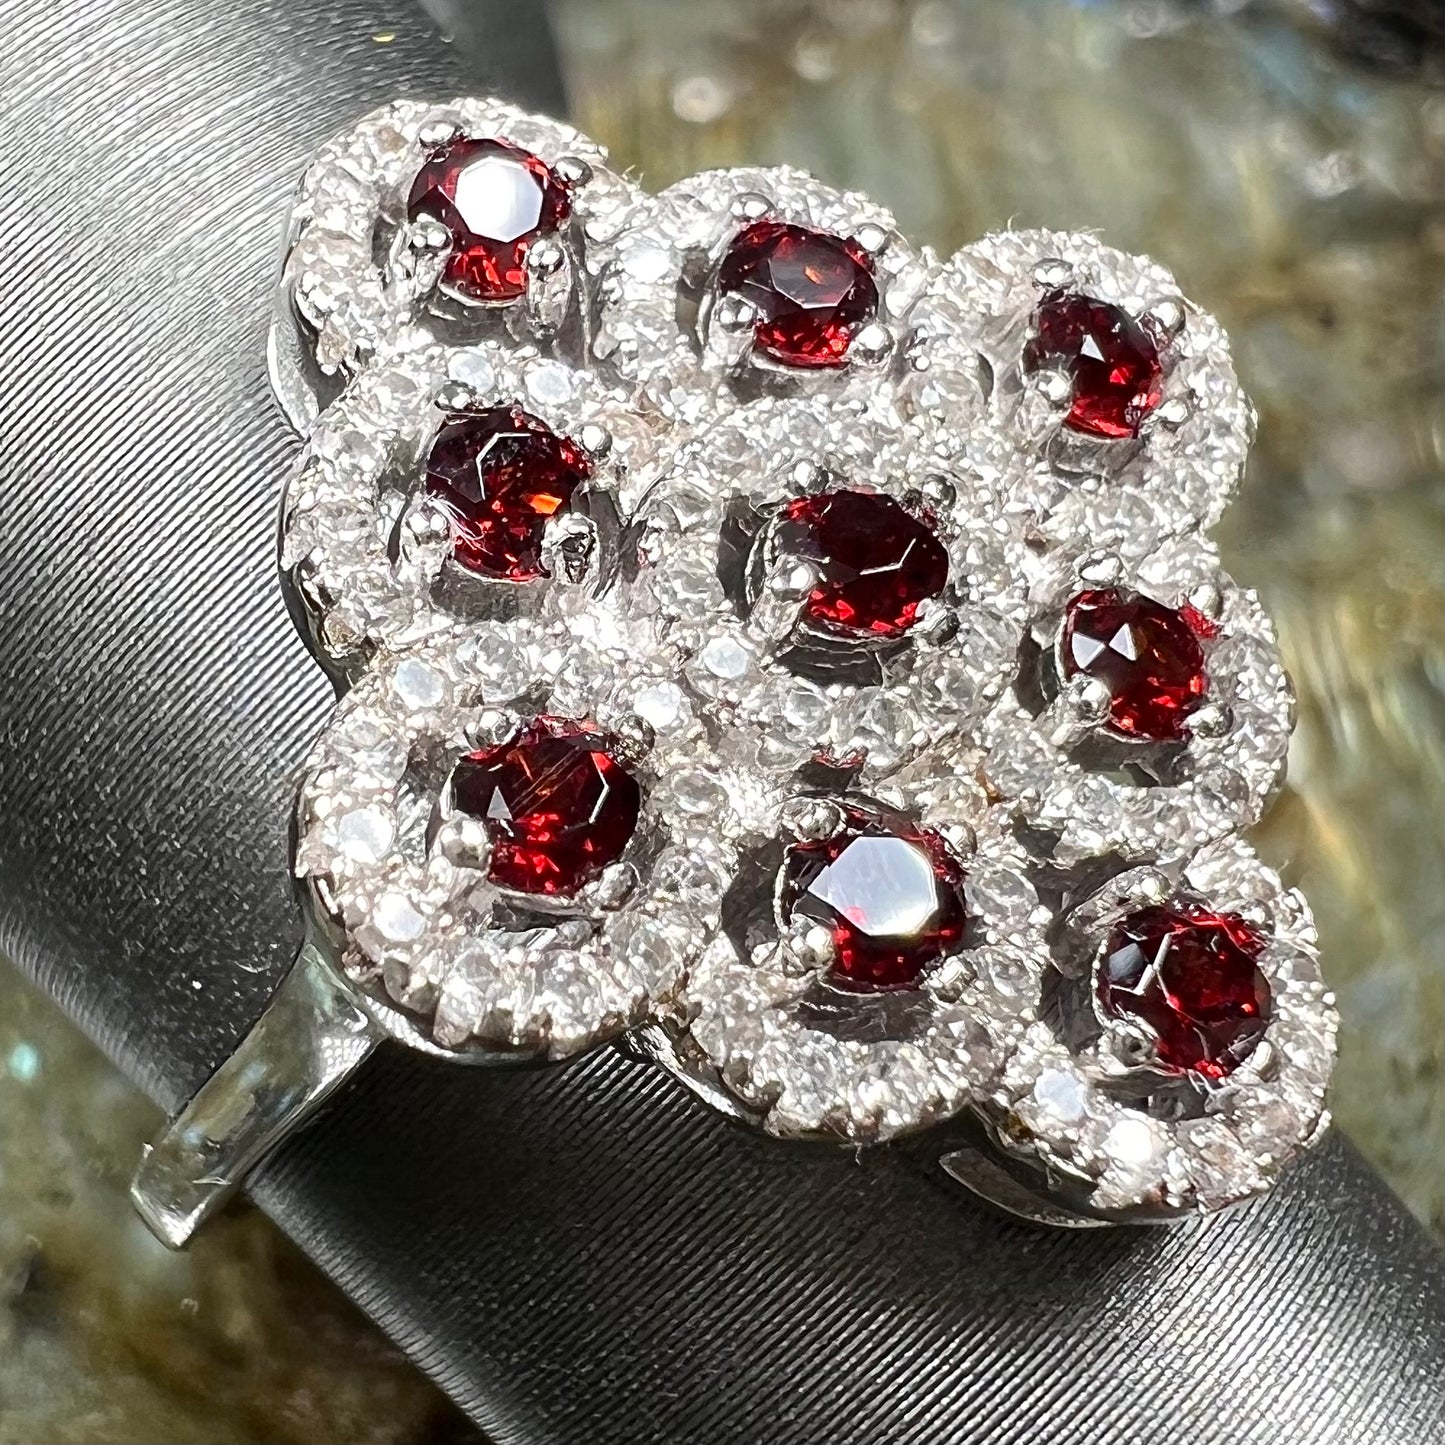 A sterling silver cluster ring set with round almandine garnet main stones and white zircon accents.